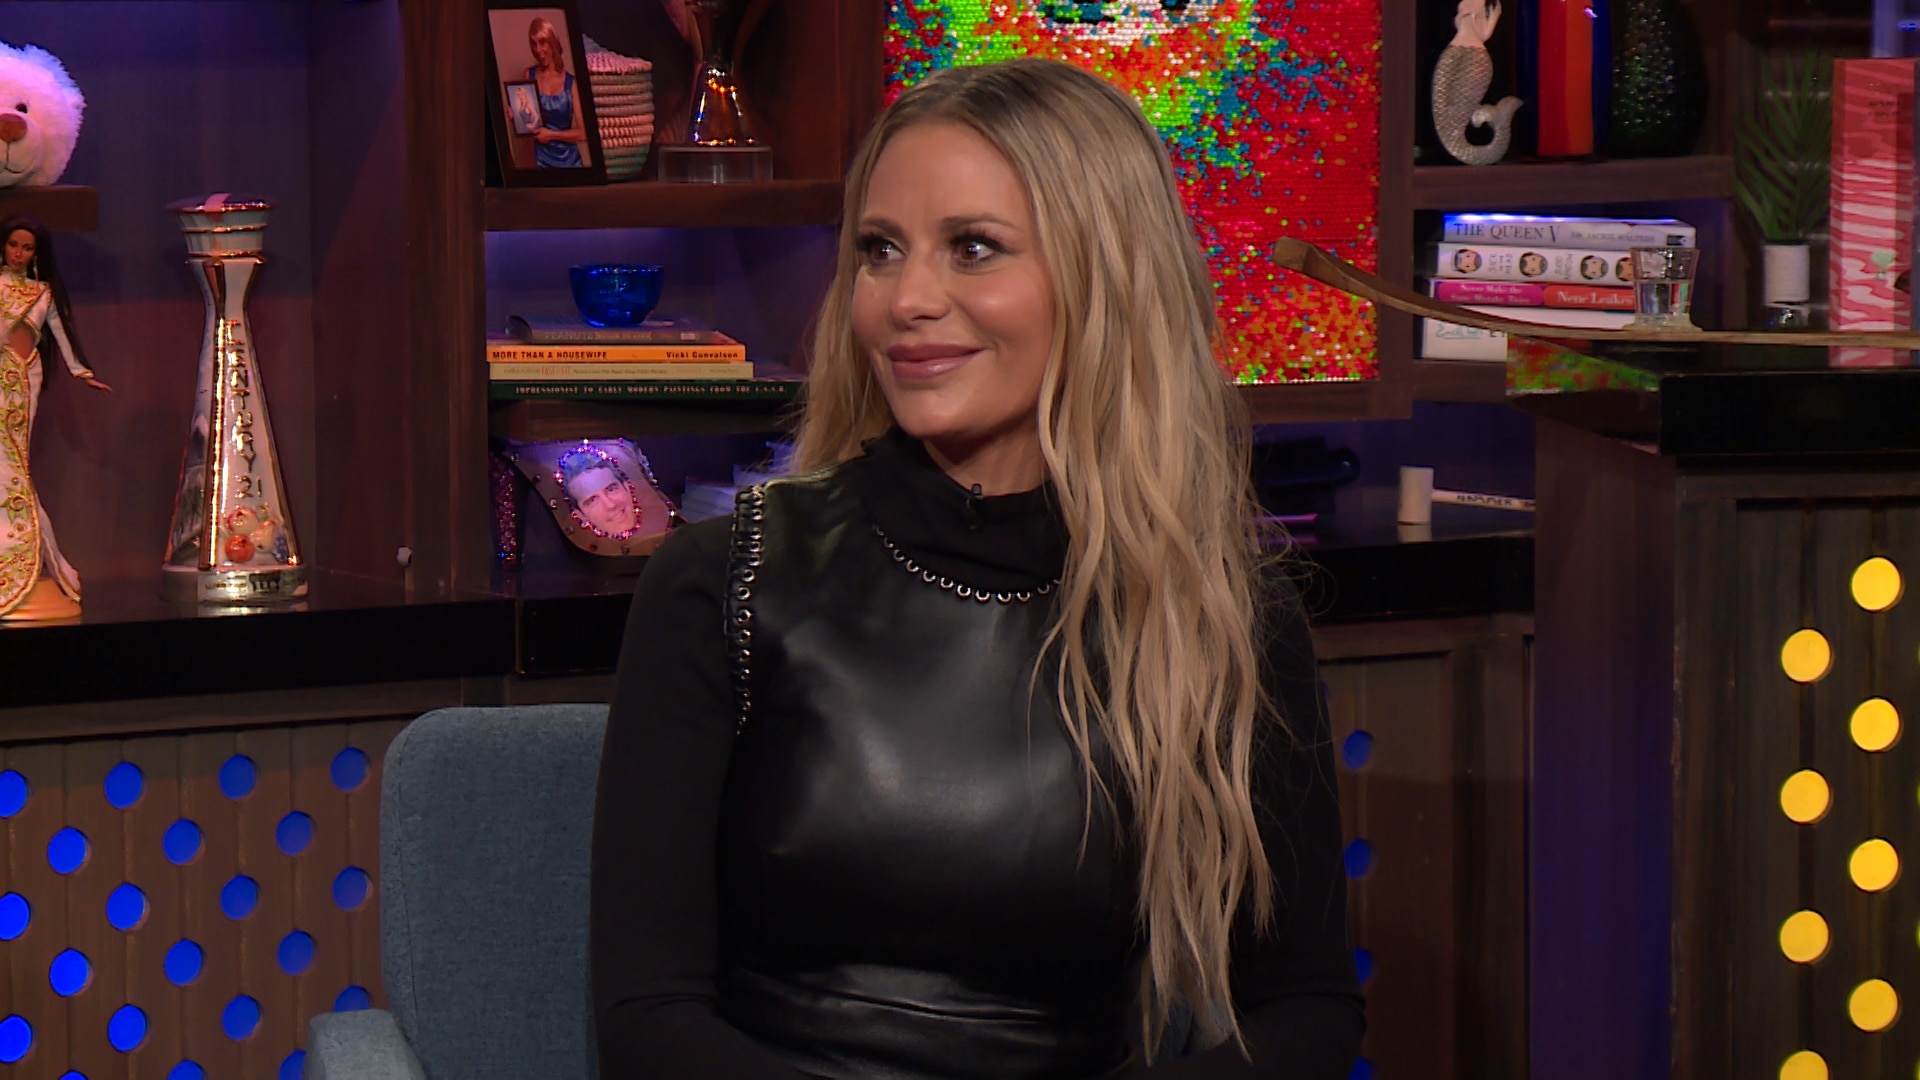 Watch Watch What Happens Live Highlight Does Dorit Kemsley Believe That Kathy Hilton Really Had